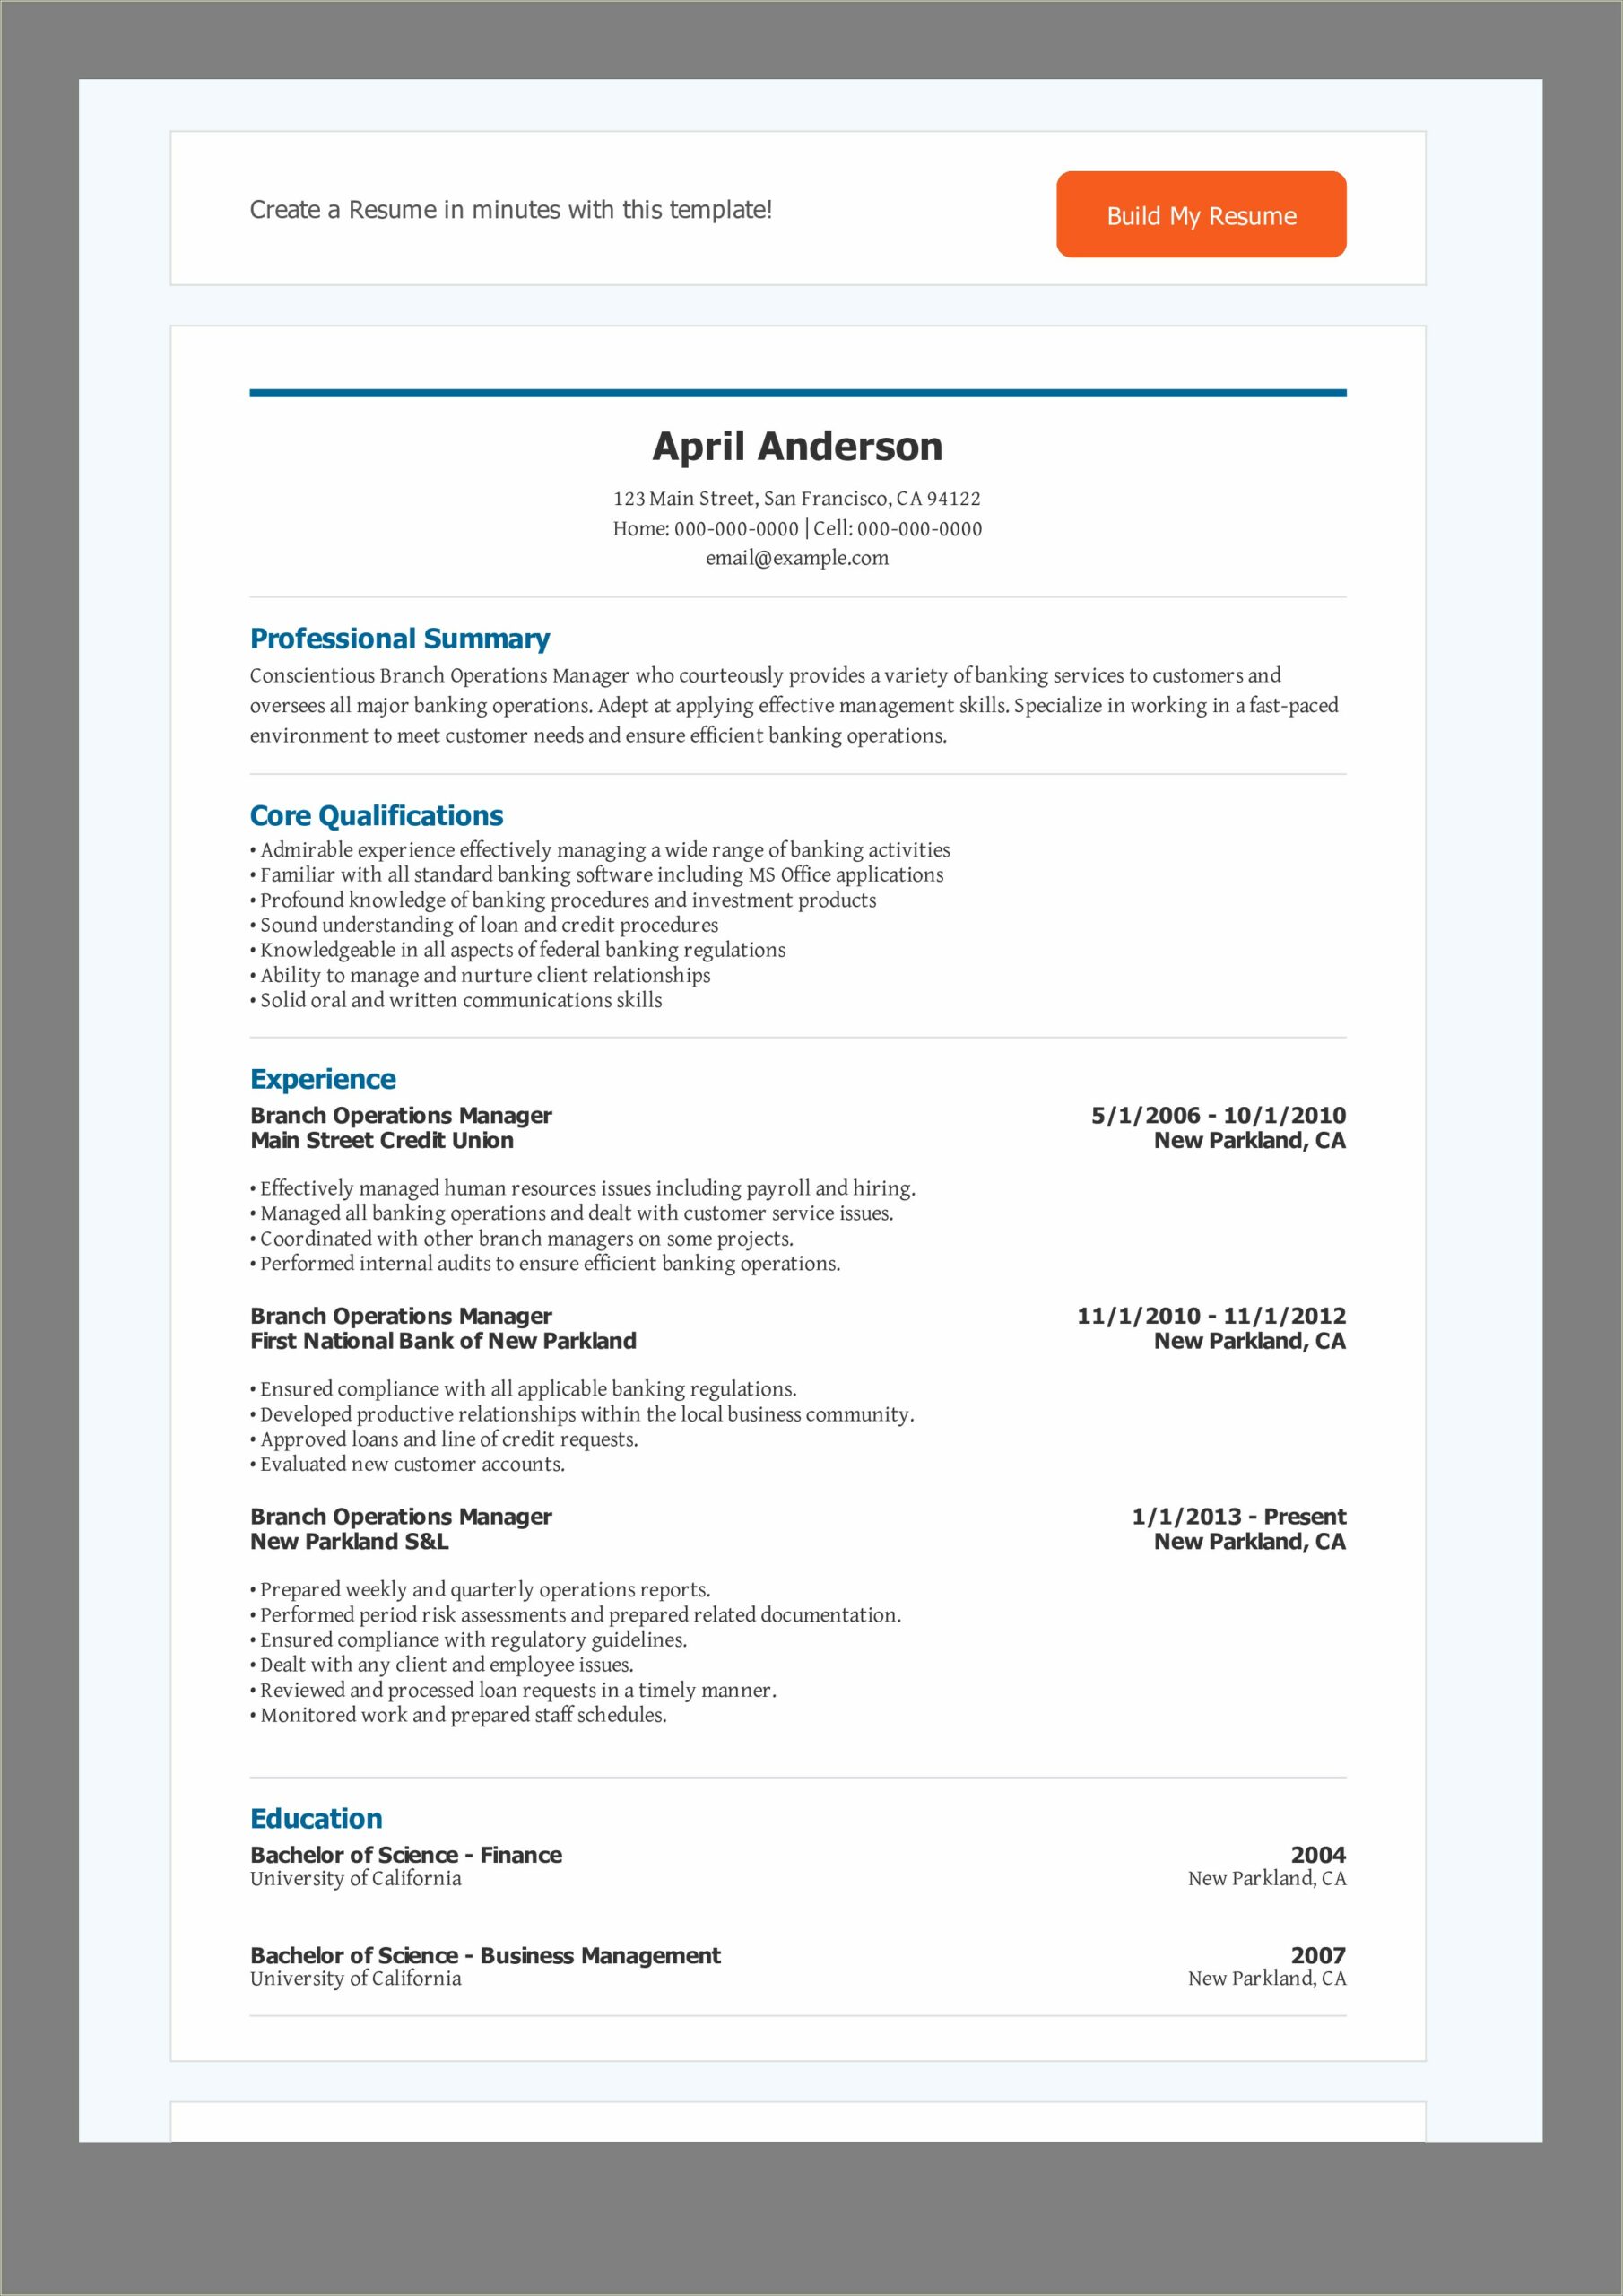 Resume Format For Experienced Bank Managers